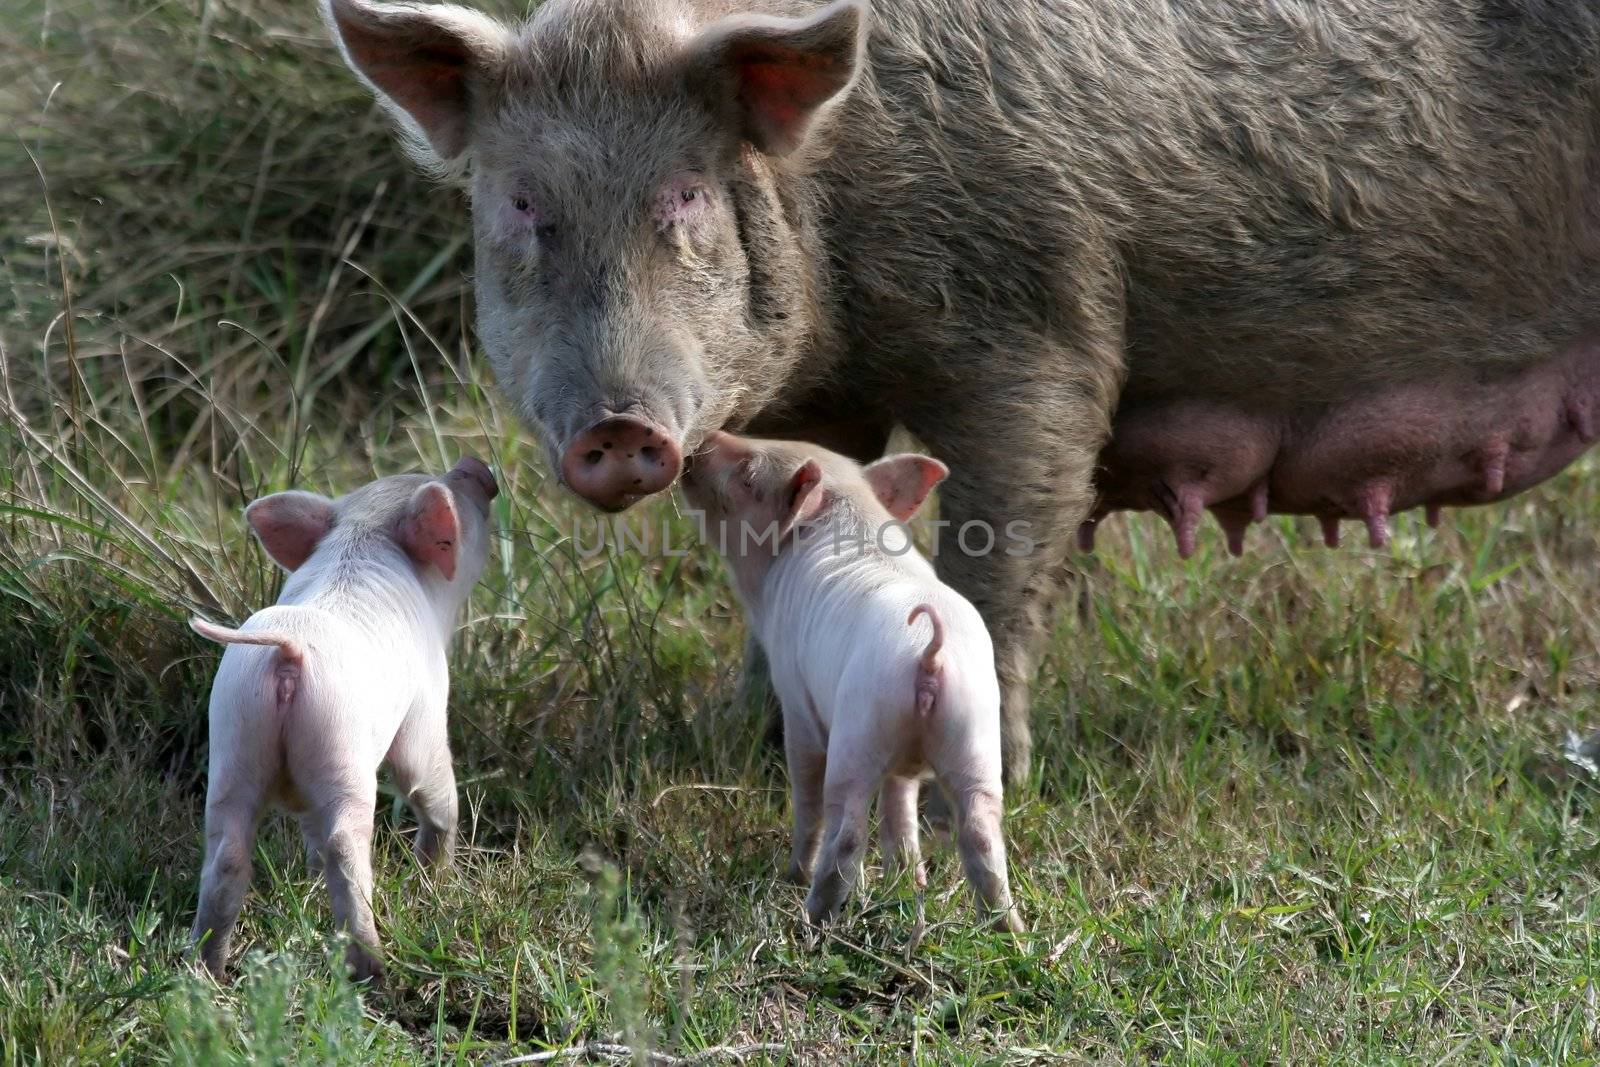 Big sow pig and two of her cute tiny pink piglets